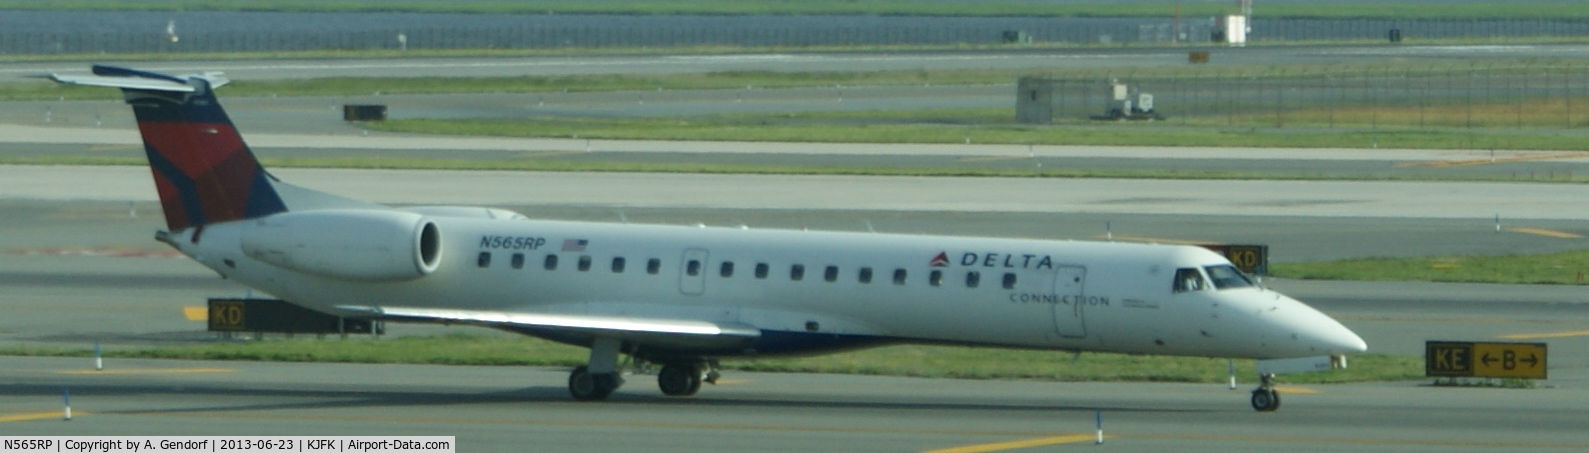 N565RP, 2002 Embraer ERJ-145LR (EMB-145LR) C/N 145679, Chautauqua Airlines (Delta Connection cs), here on the taxiway at New York - JFK(KJFK)